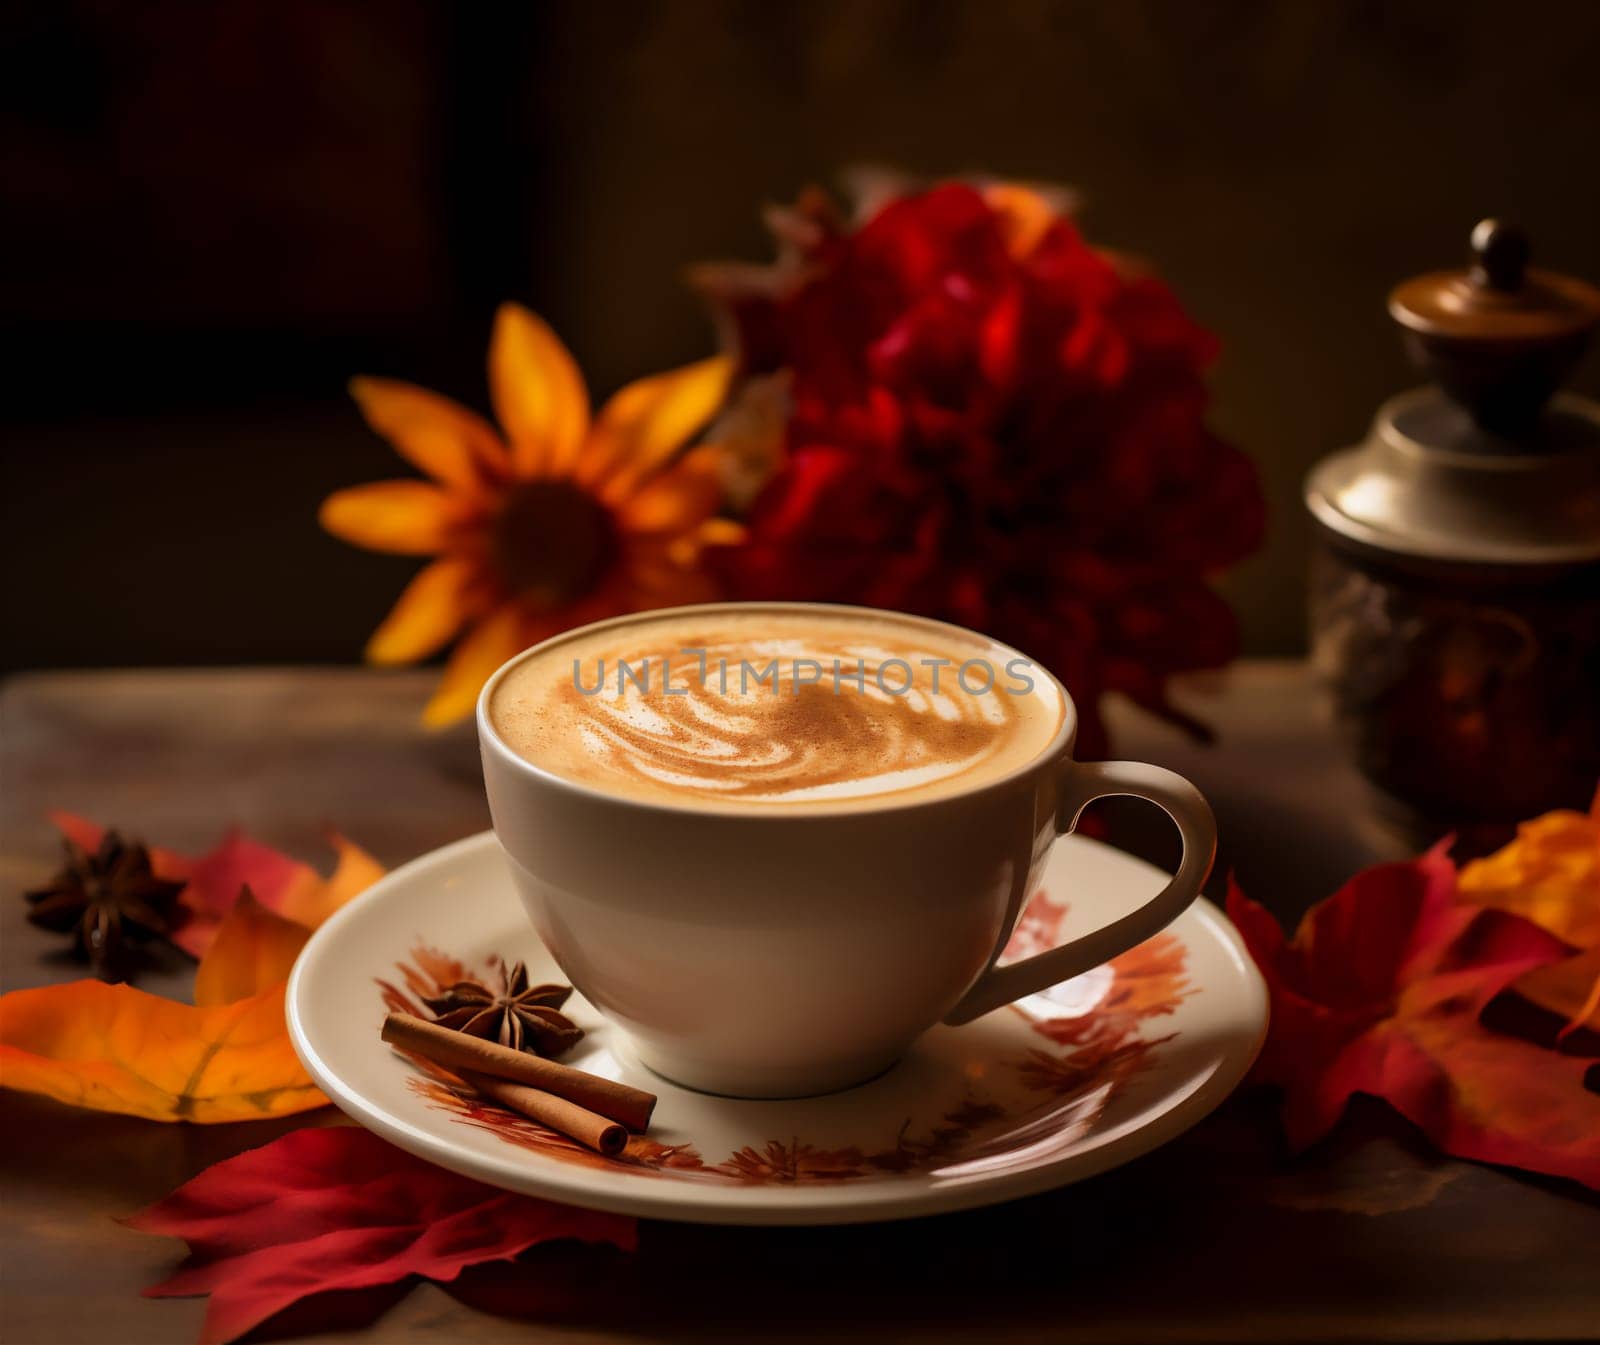 Tasty spicy brown butter cappuccino coffee with cinnamon and autumn leaves on wooden background. Fall and winter warm drinks concept